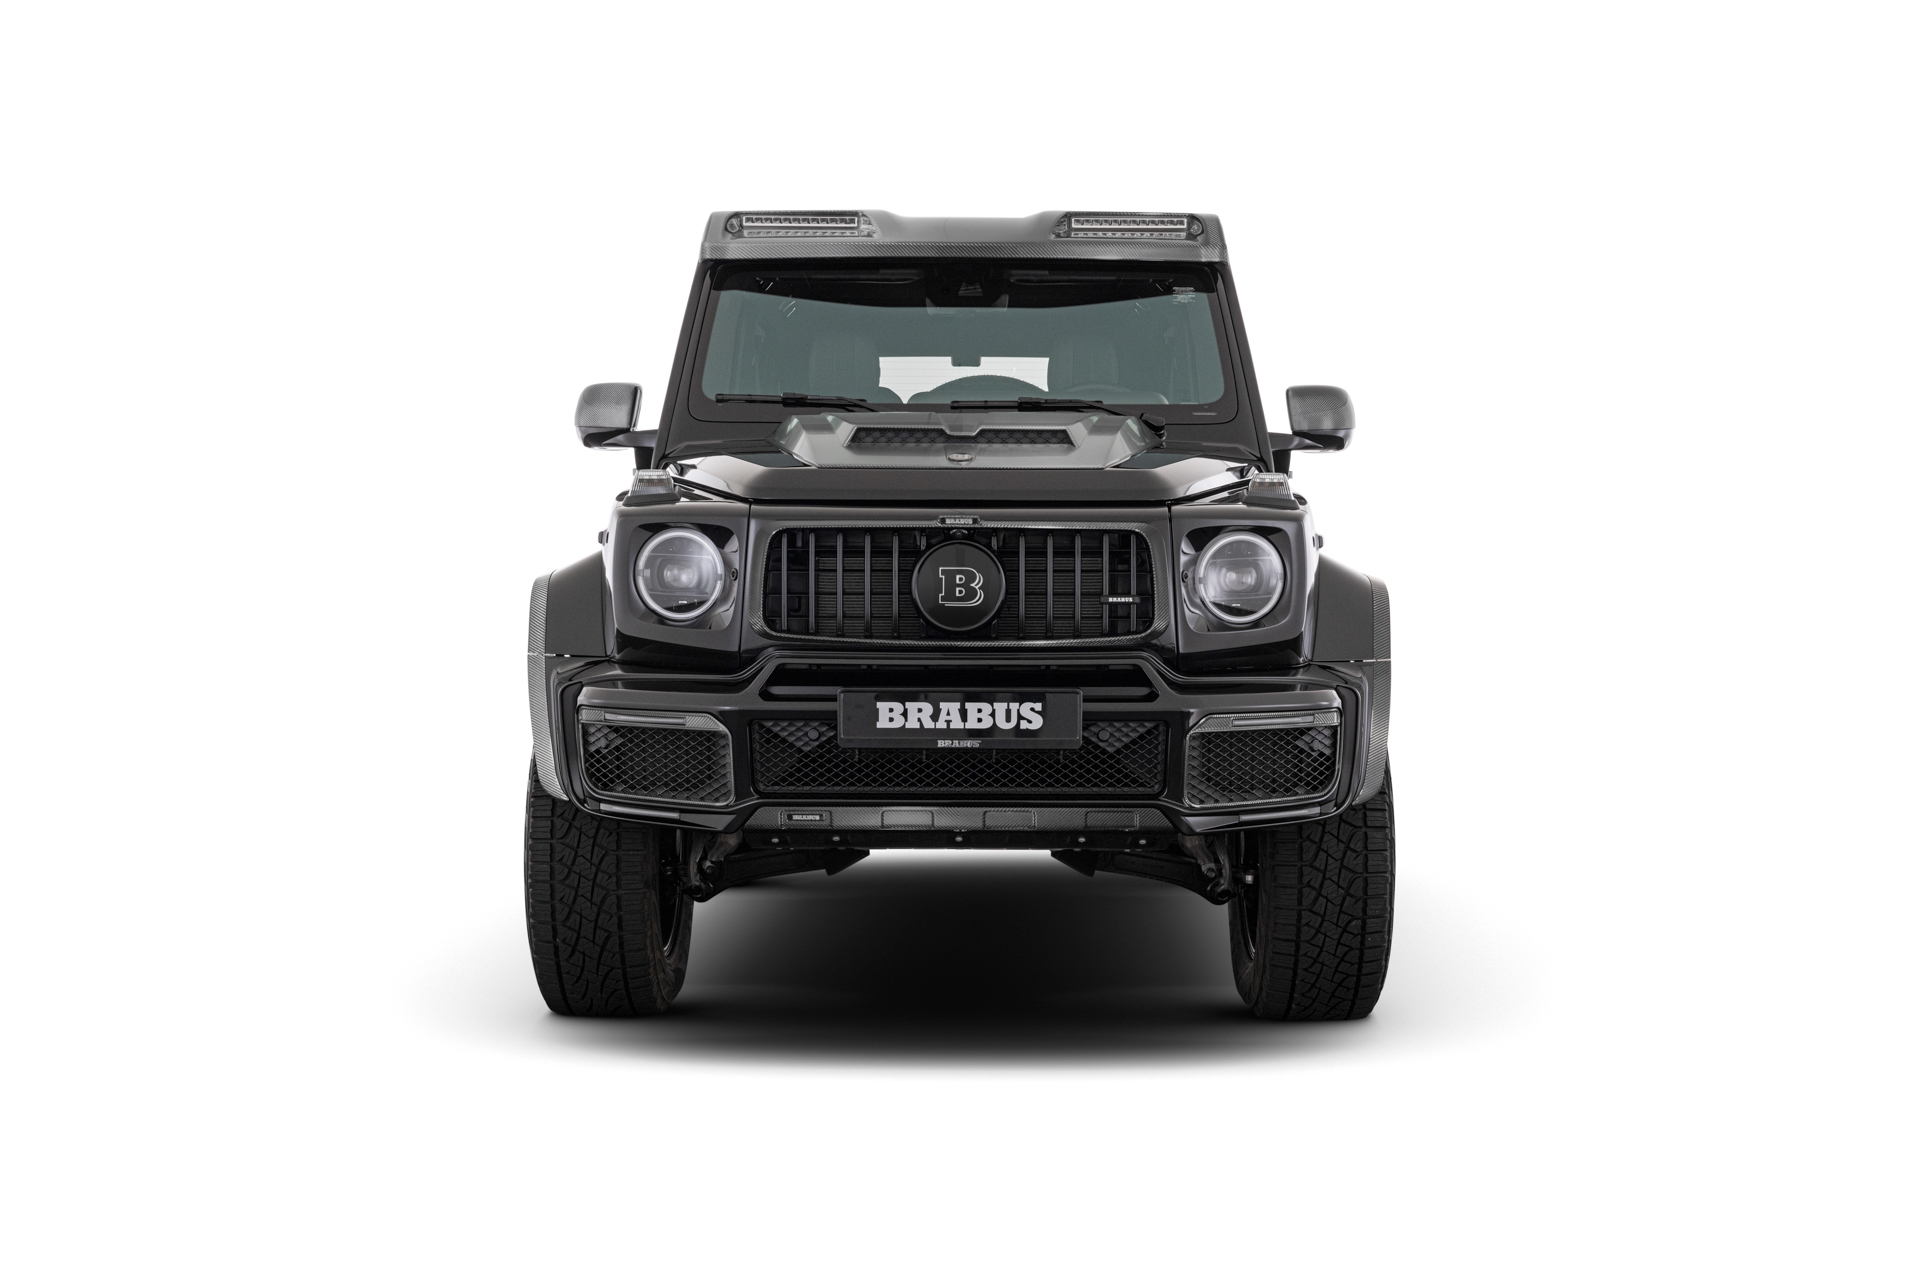 The Brabus 800 4×4² Superblack is a statement of extraordinary style and strength